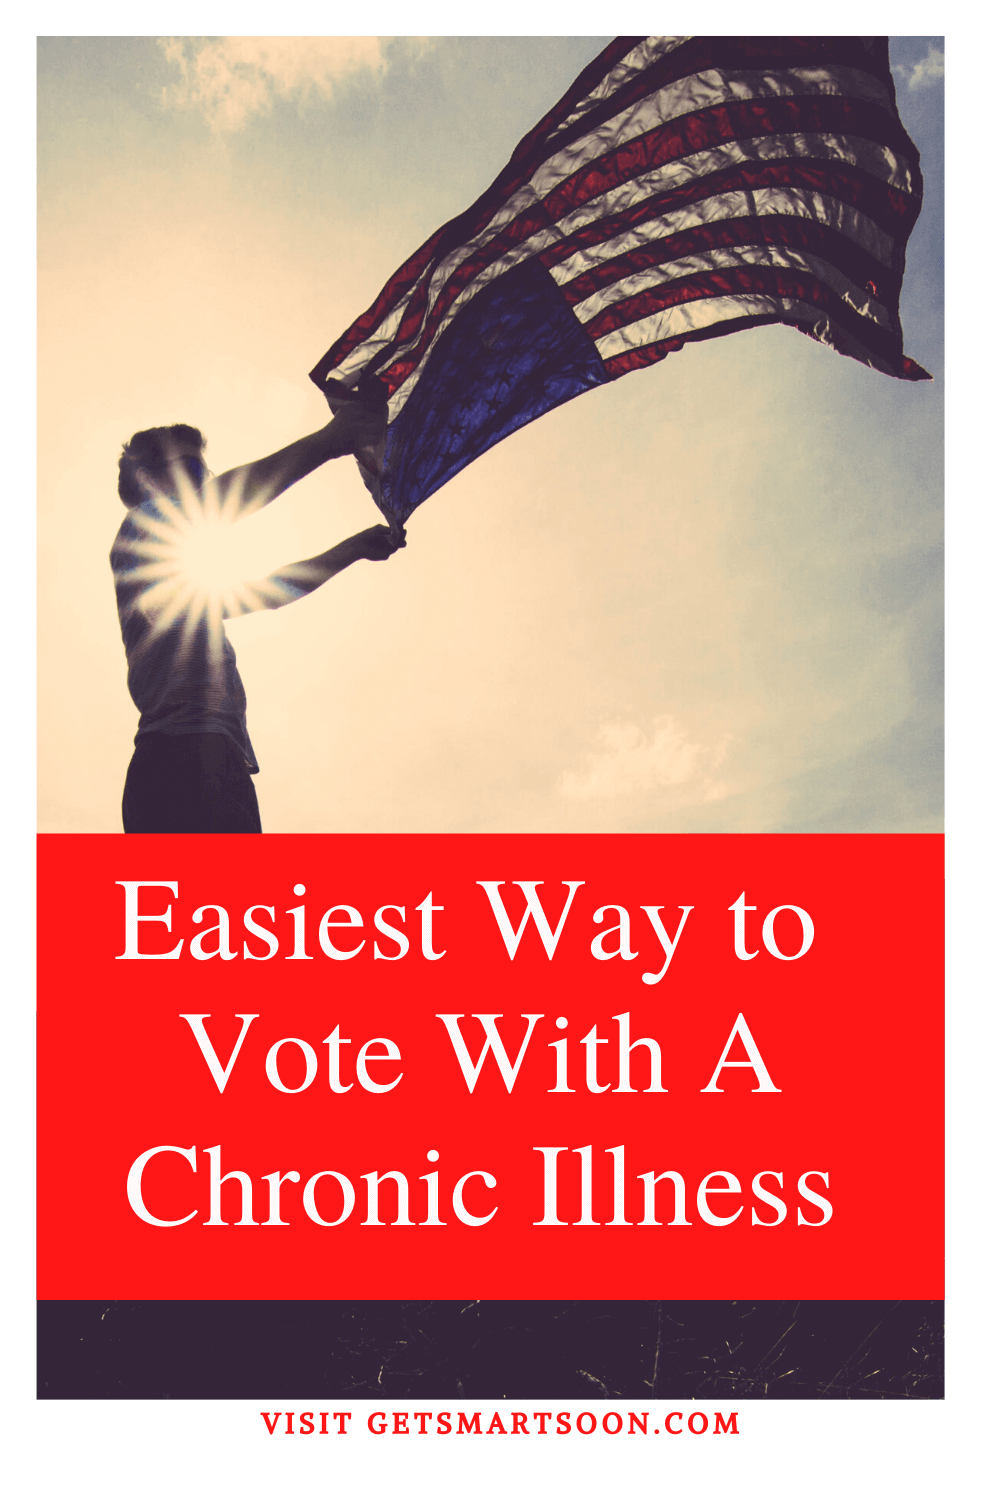 Easiest way to vote with a chronic illness pic